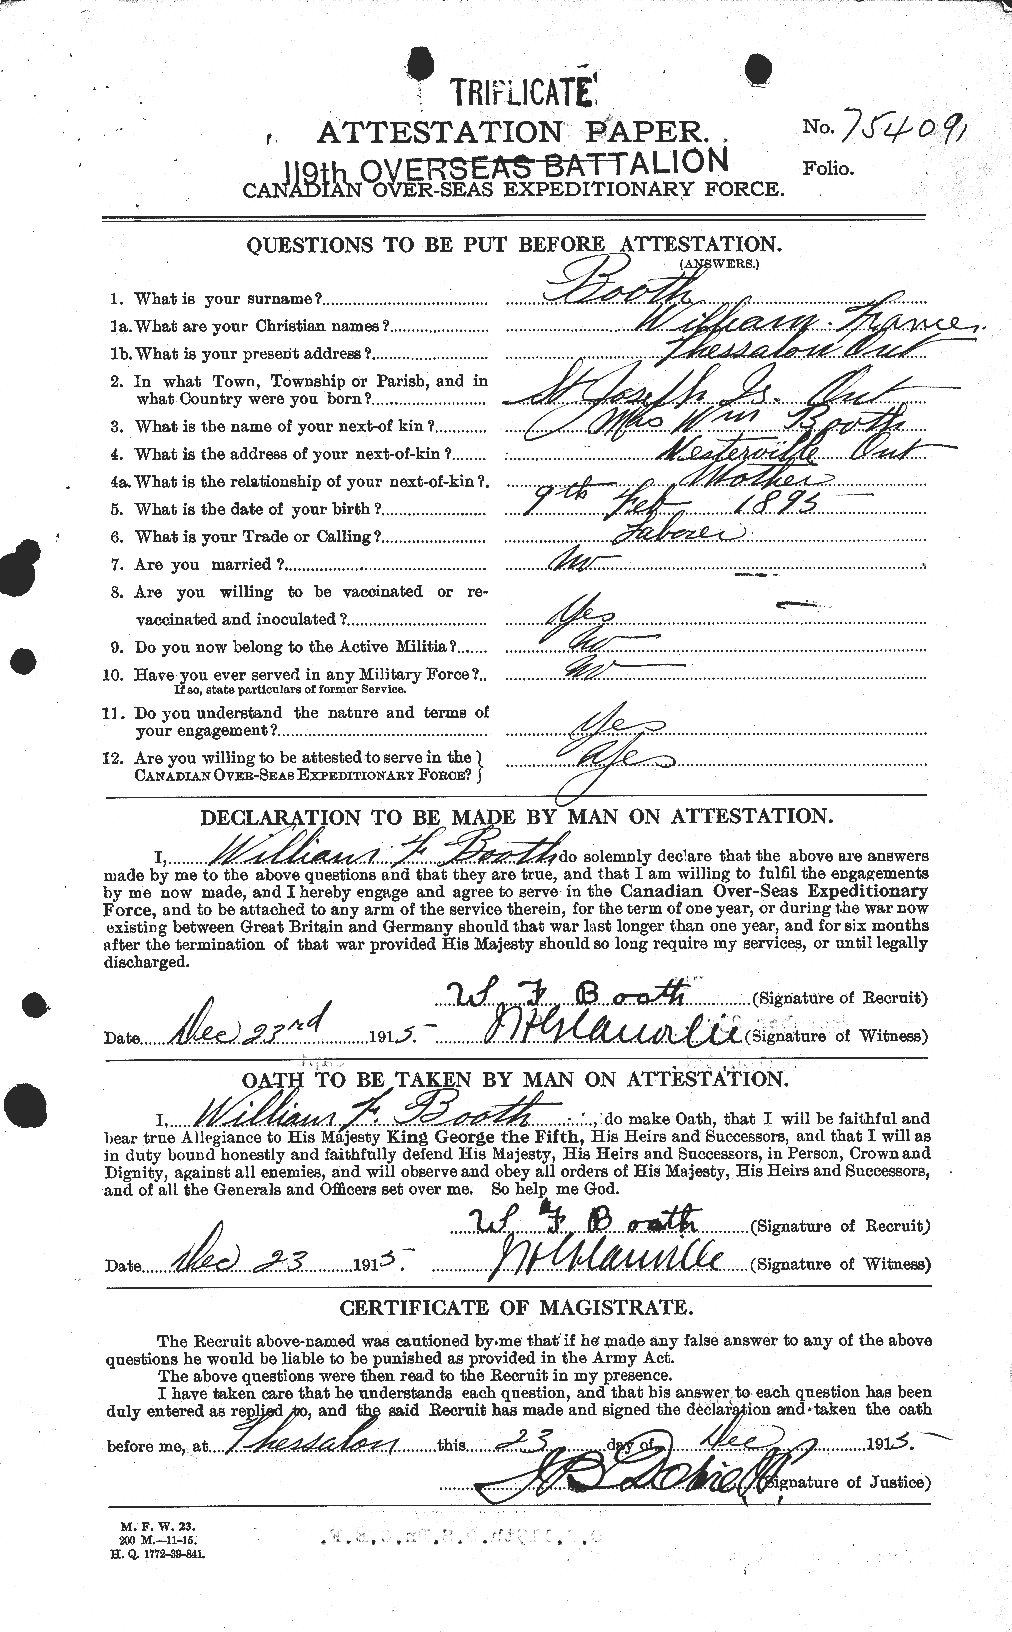 Personnel Records of the First World War - CEF 251026a